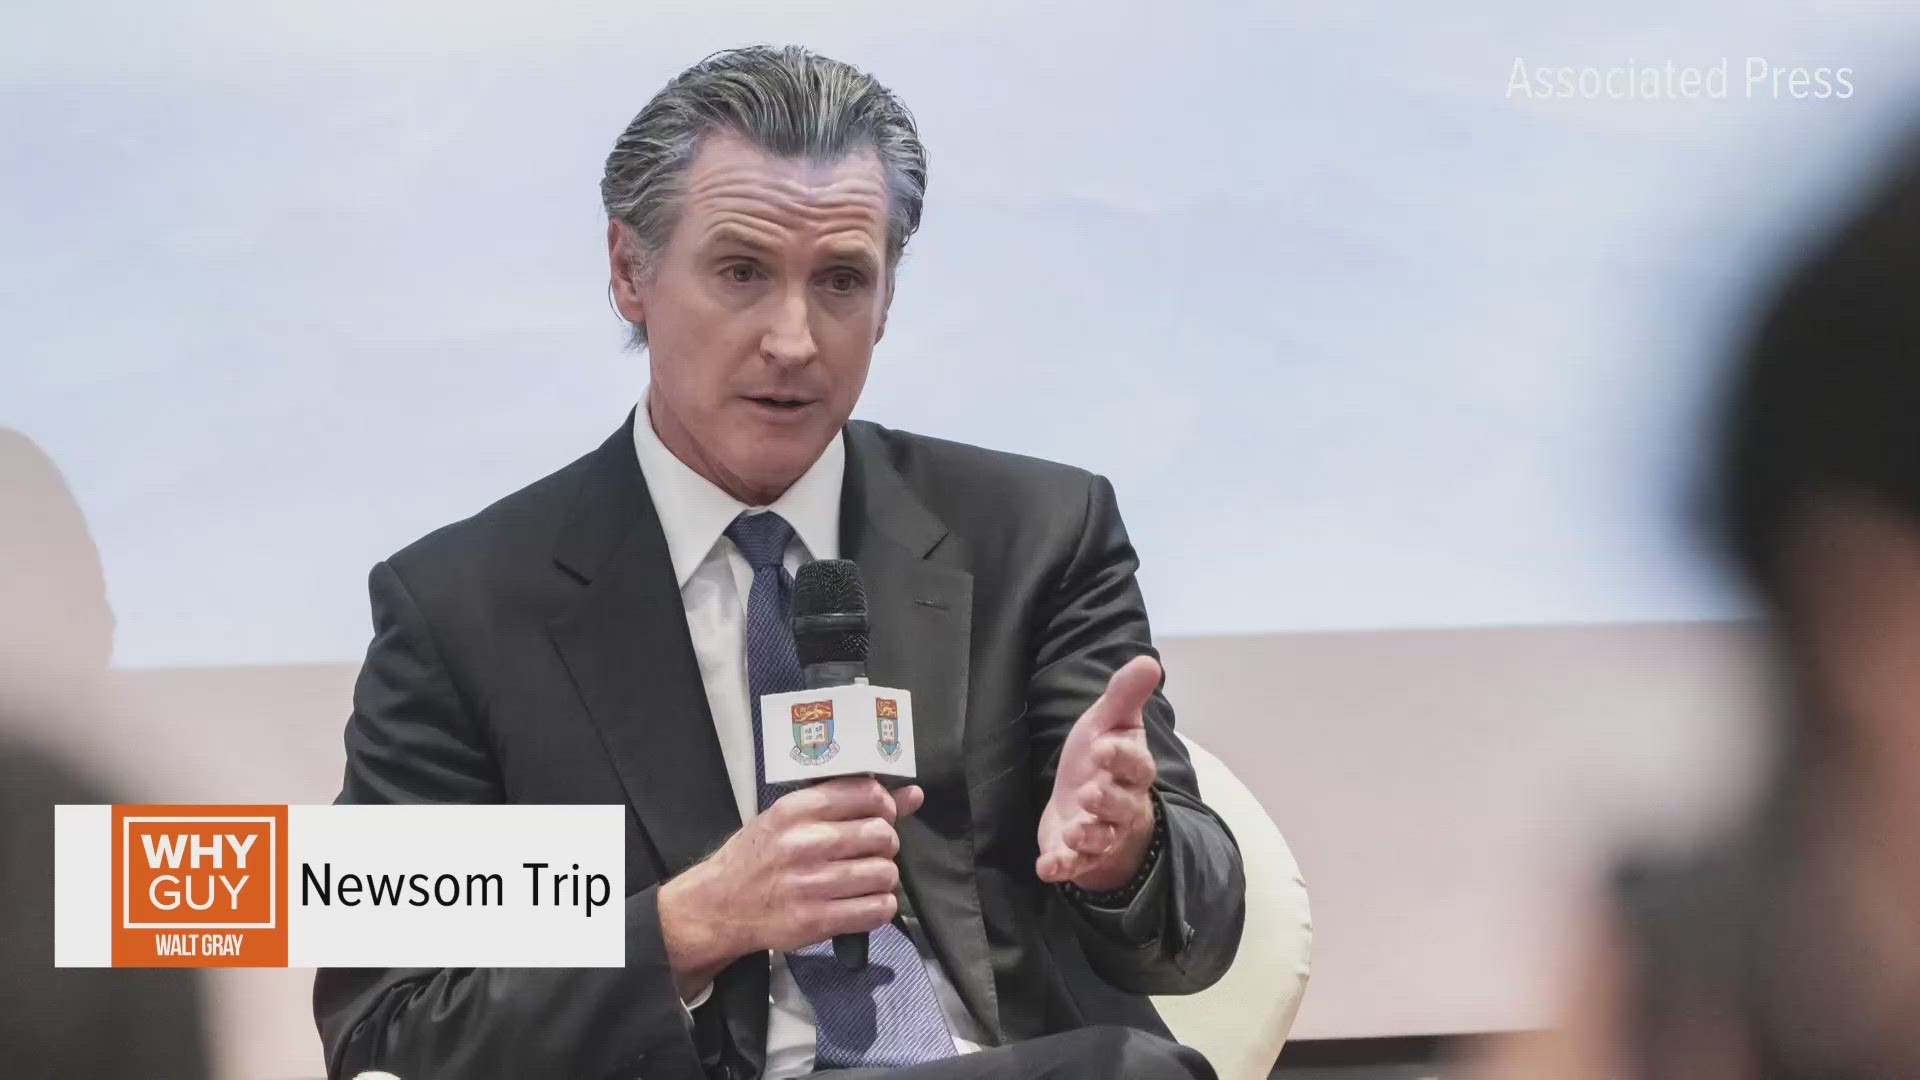 The California State Protocol Foundation based in Oakland is paying for Newsom's weeklong trip to China.